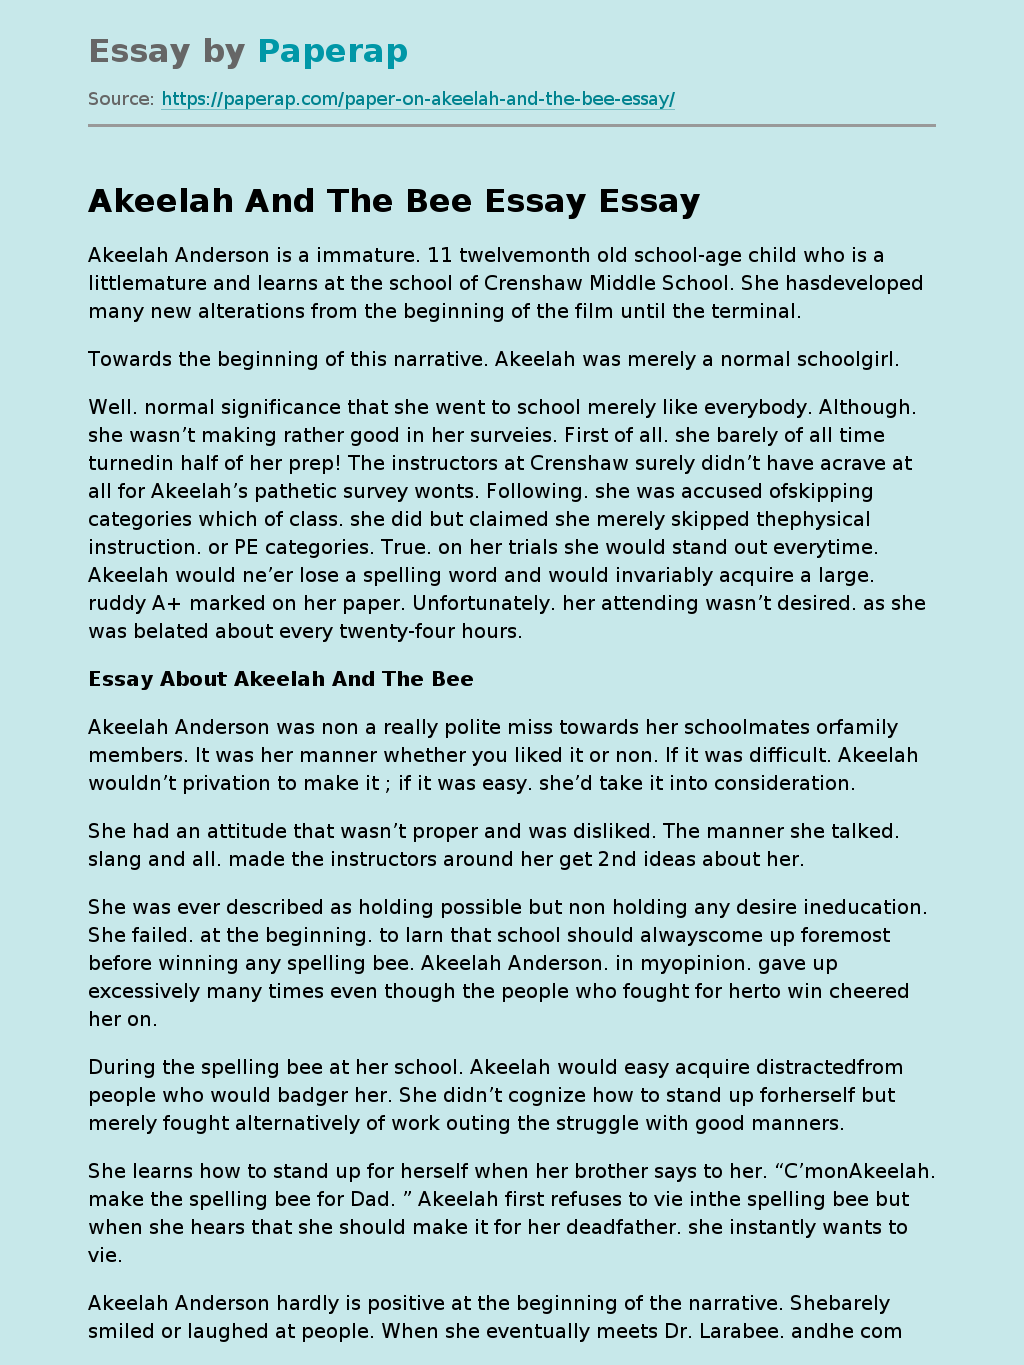 Akeelah And The Bee Essay